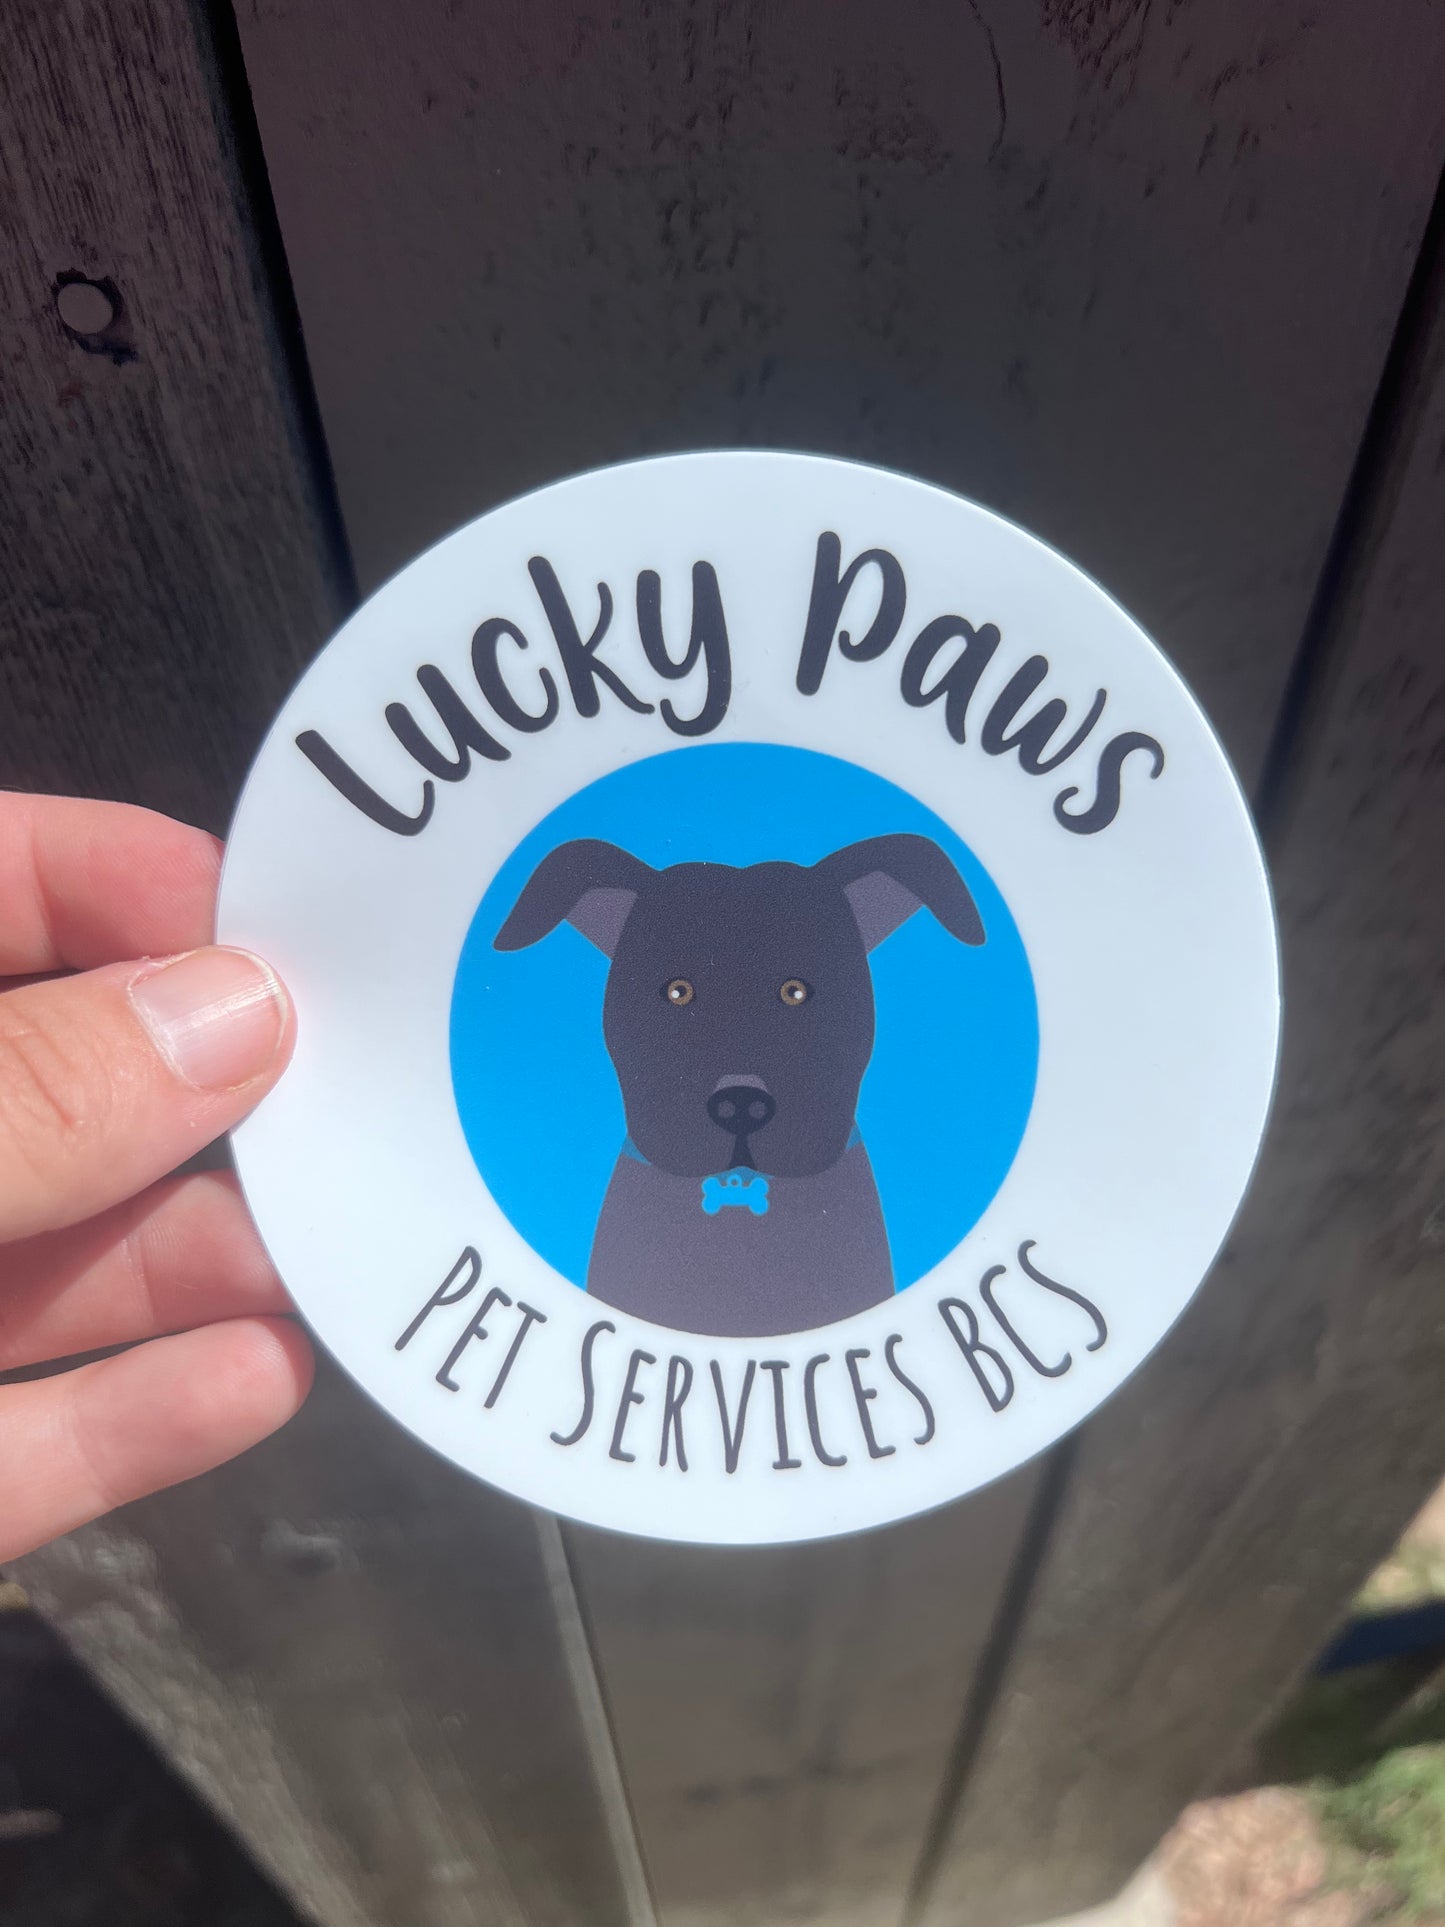 Lucky Paws Pet Services BCS Decal